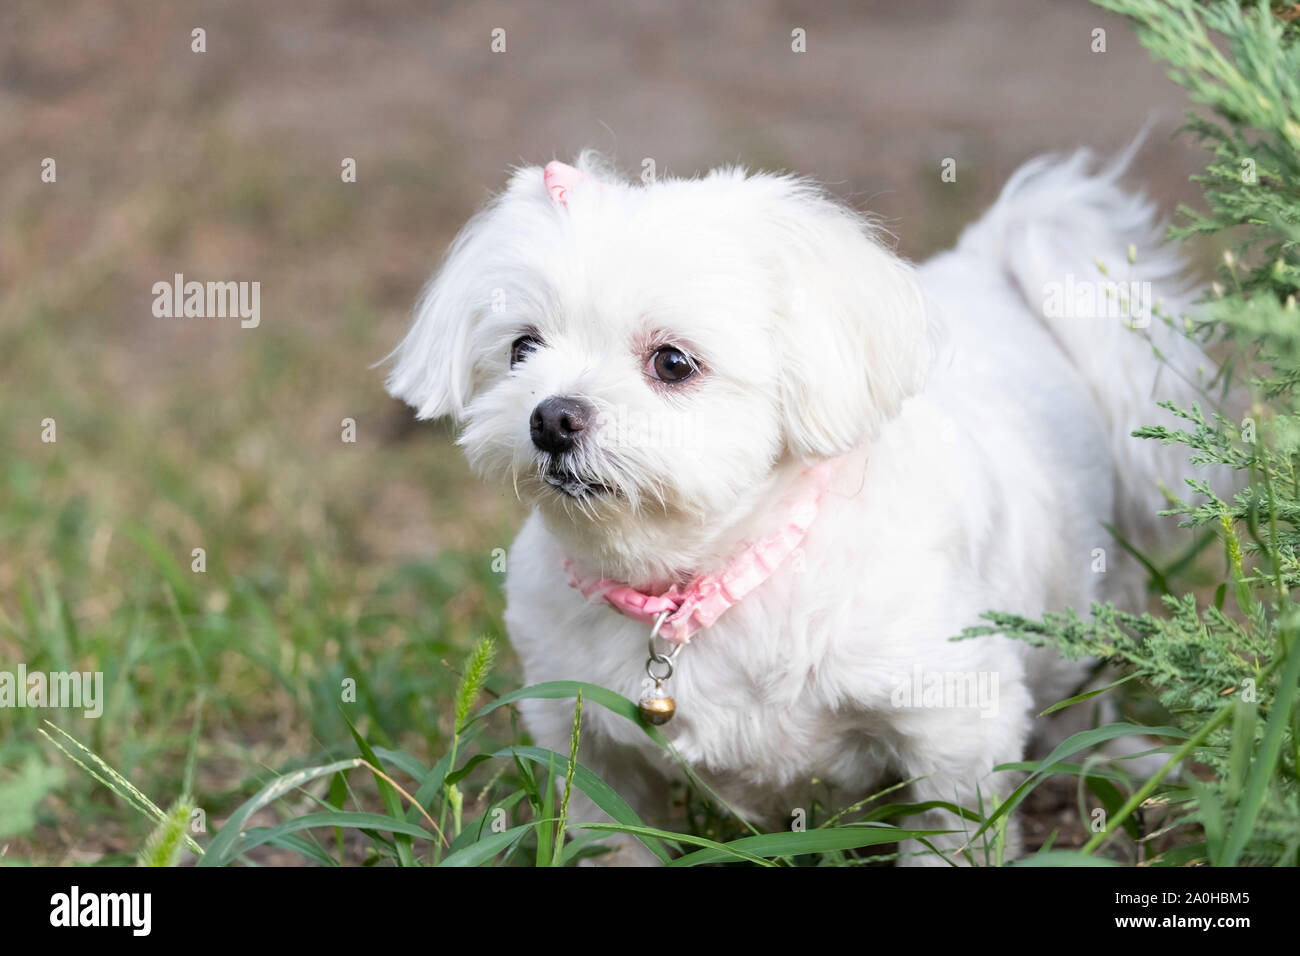 Little funny white dog with a pink collar walks in the green grass Stock Photo